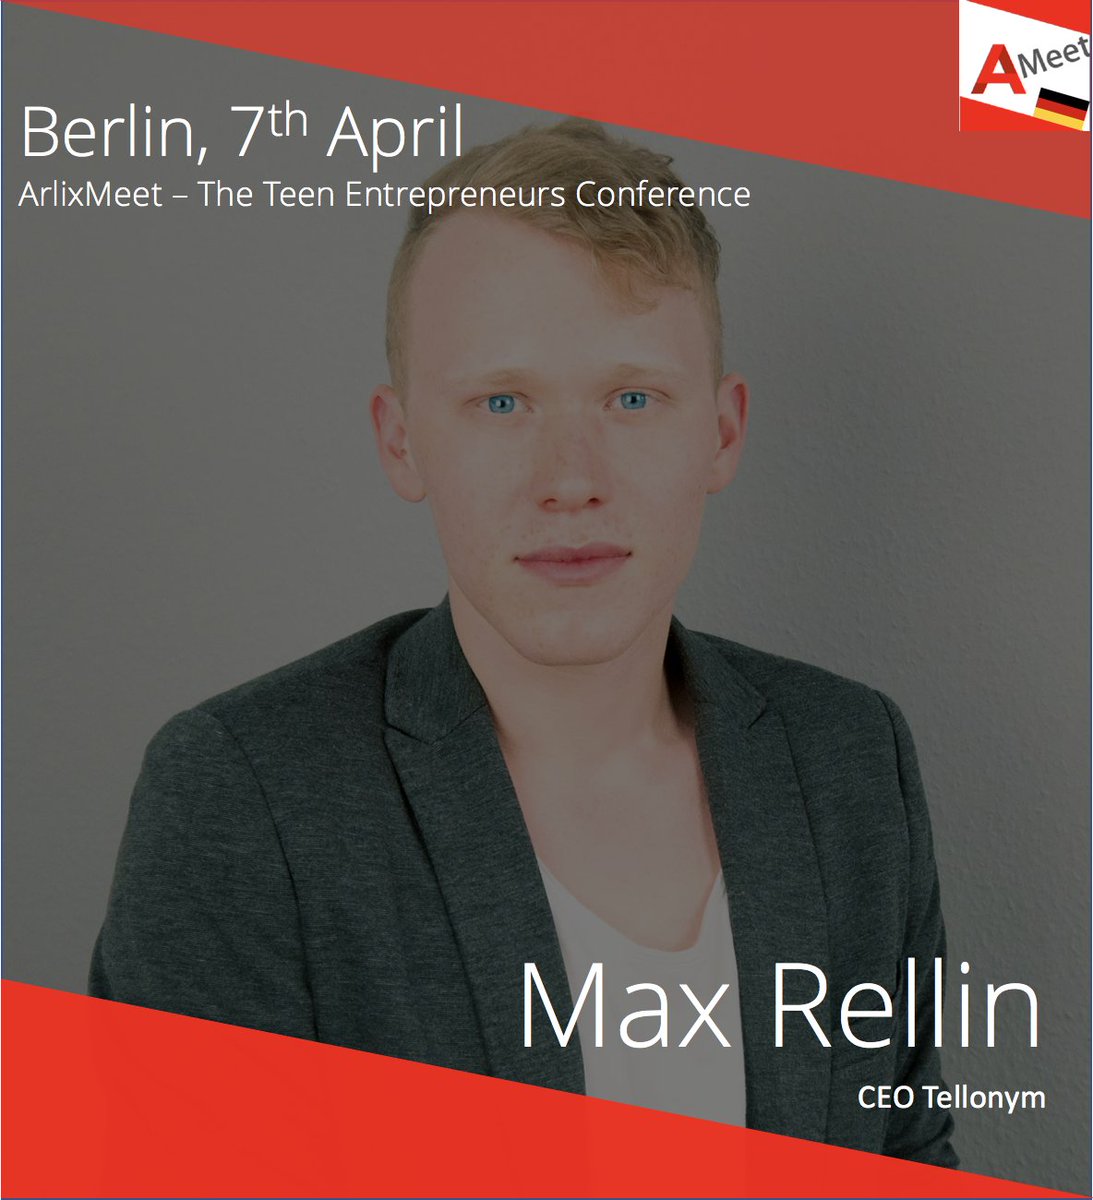 Max Rellin, CEO of hit app @Tellonym will be speaking at our conference on Saturday! Get your tickets: eventbrite.co.uk/e/teen-entrepr… 

#TeenEntrepreneur #Jungunternehmer #TeenagerUnternehmer